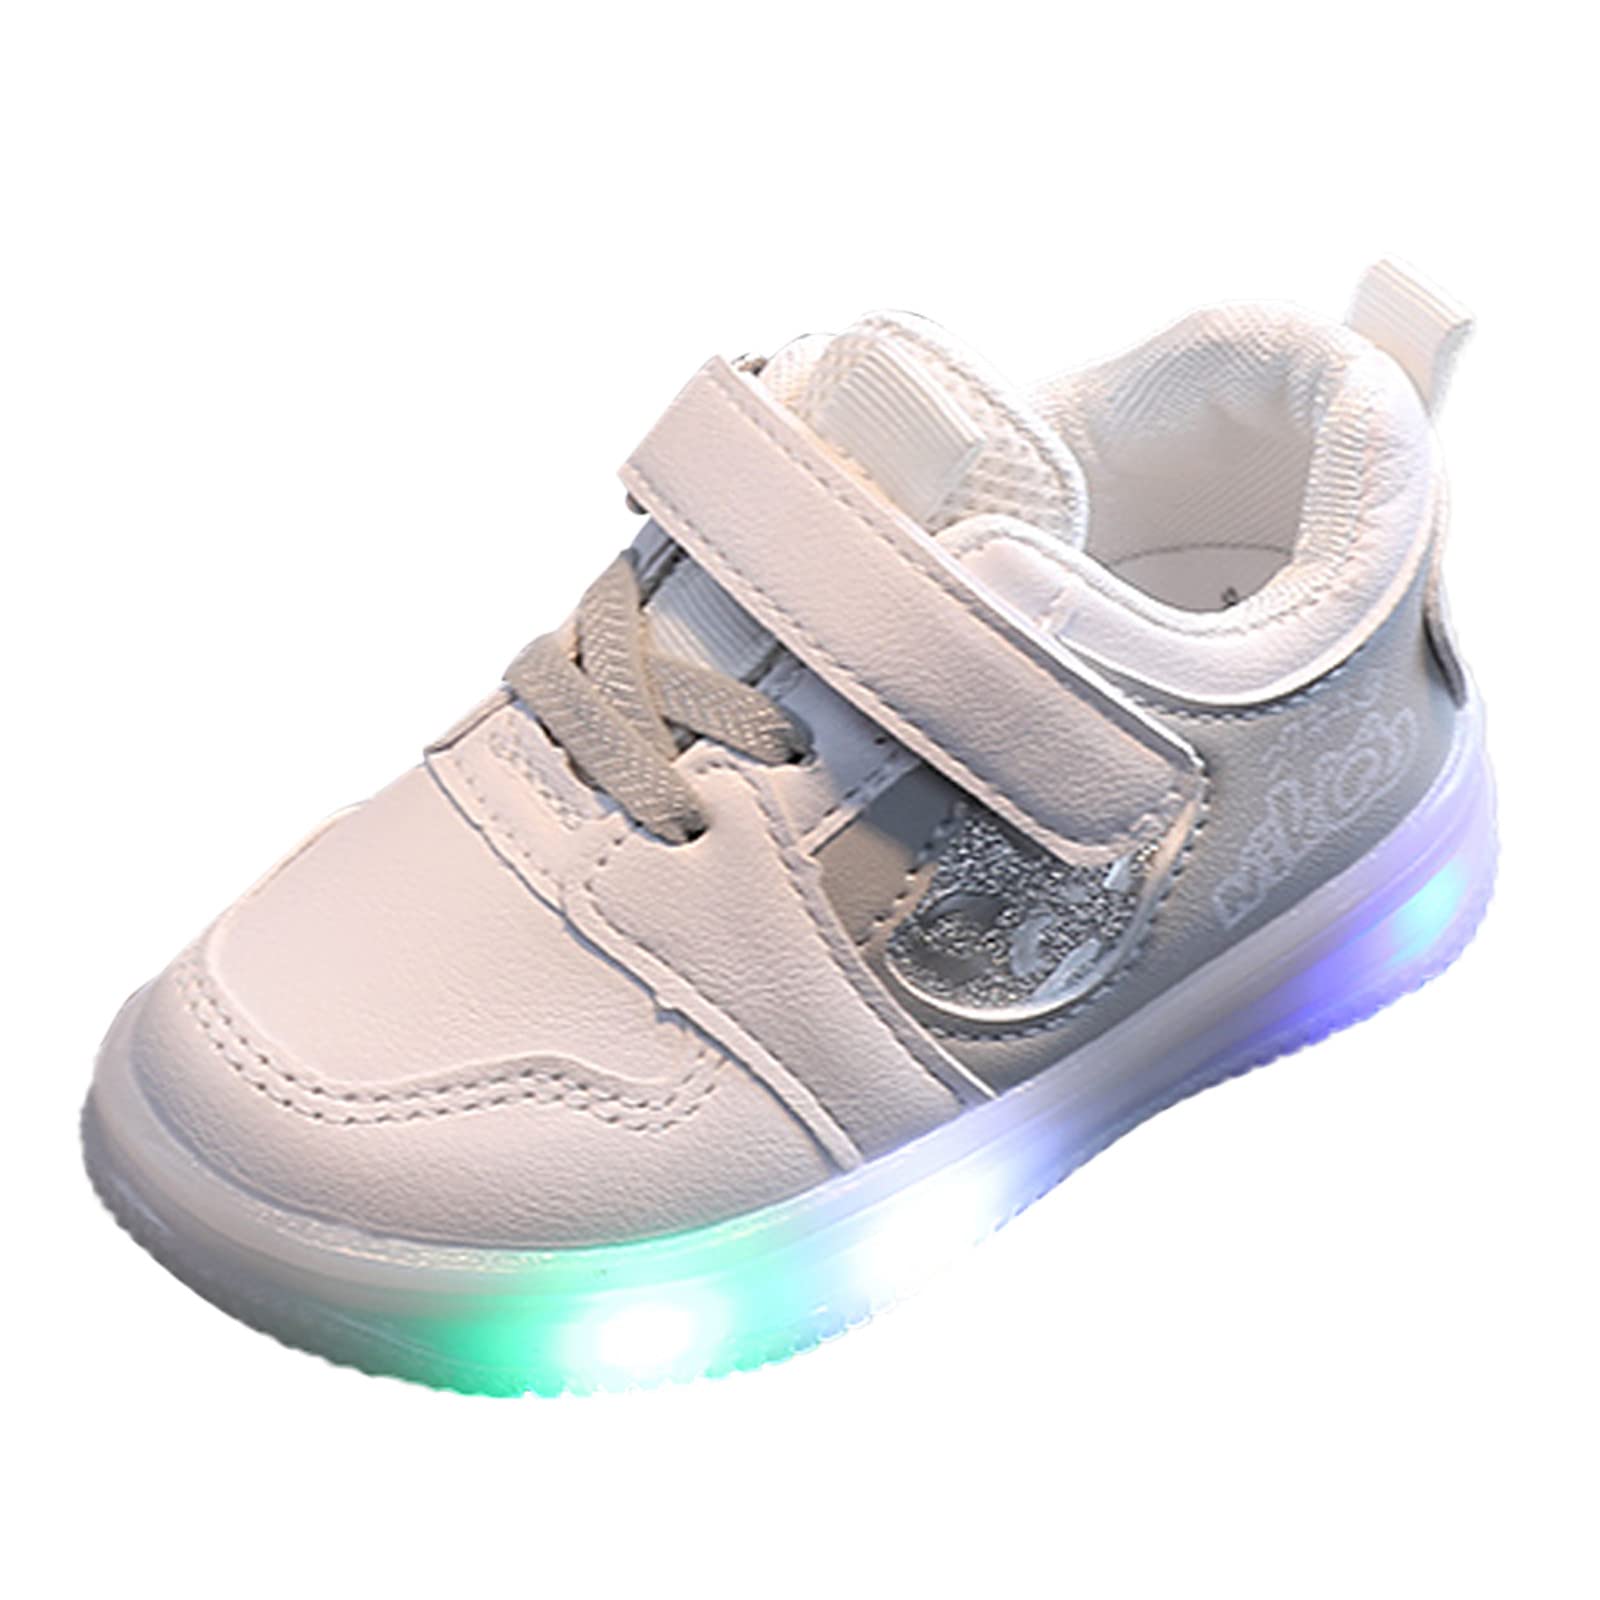 light up toddler shoes